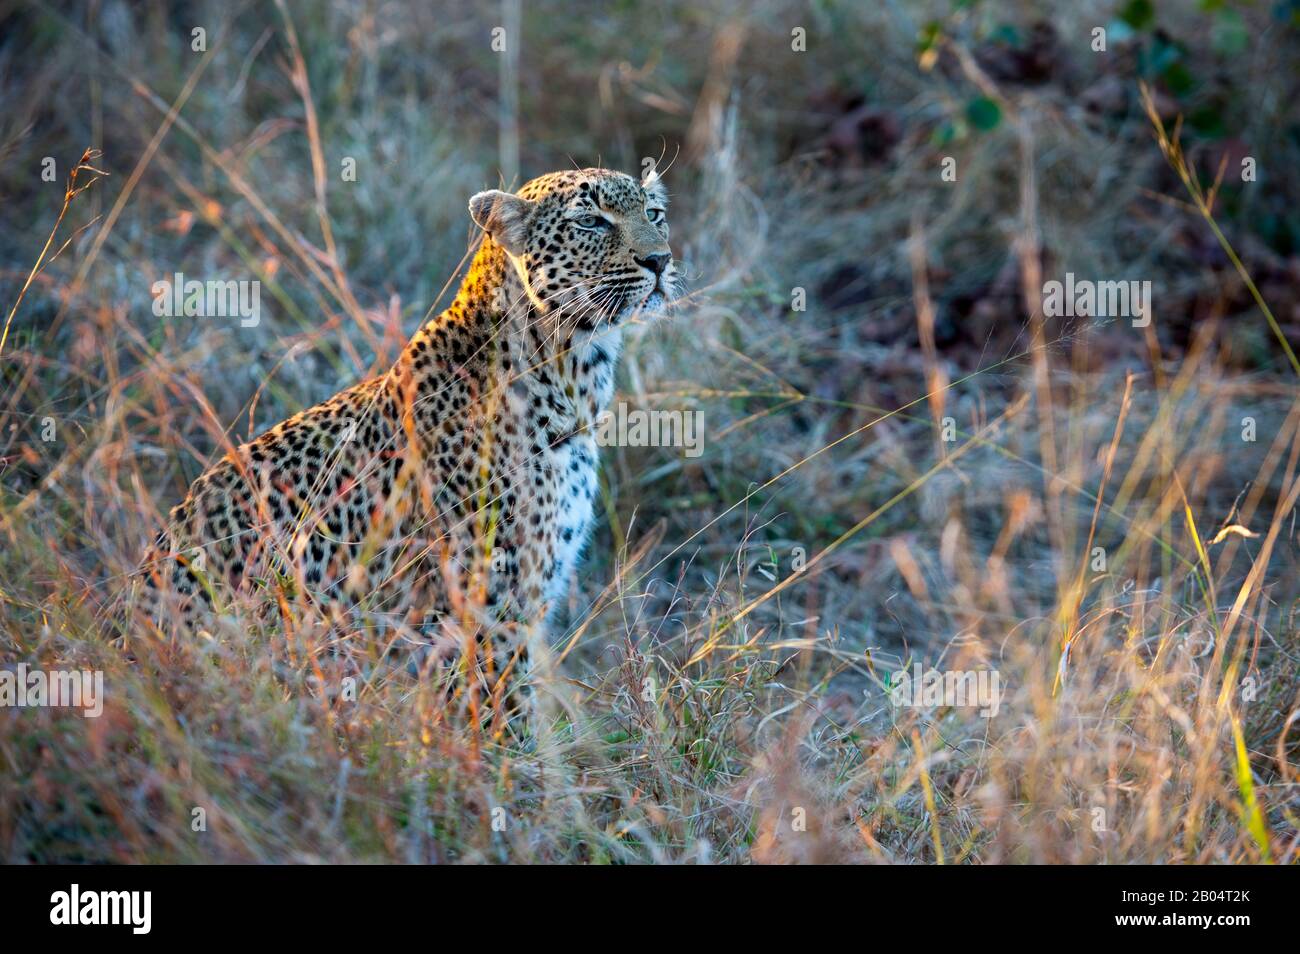 A leopard (Panthera pardus) in the high grass of the Sabi Sands Game Reserve adjacent to the Kruger National Park in South Africa. Stock Photo